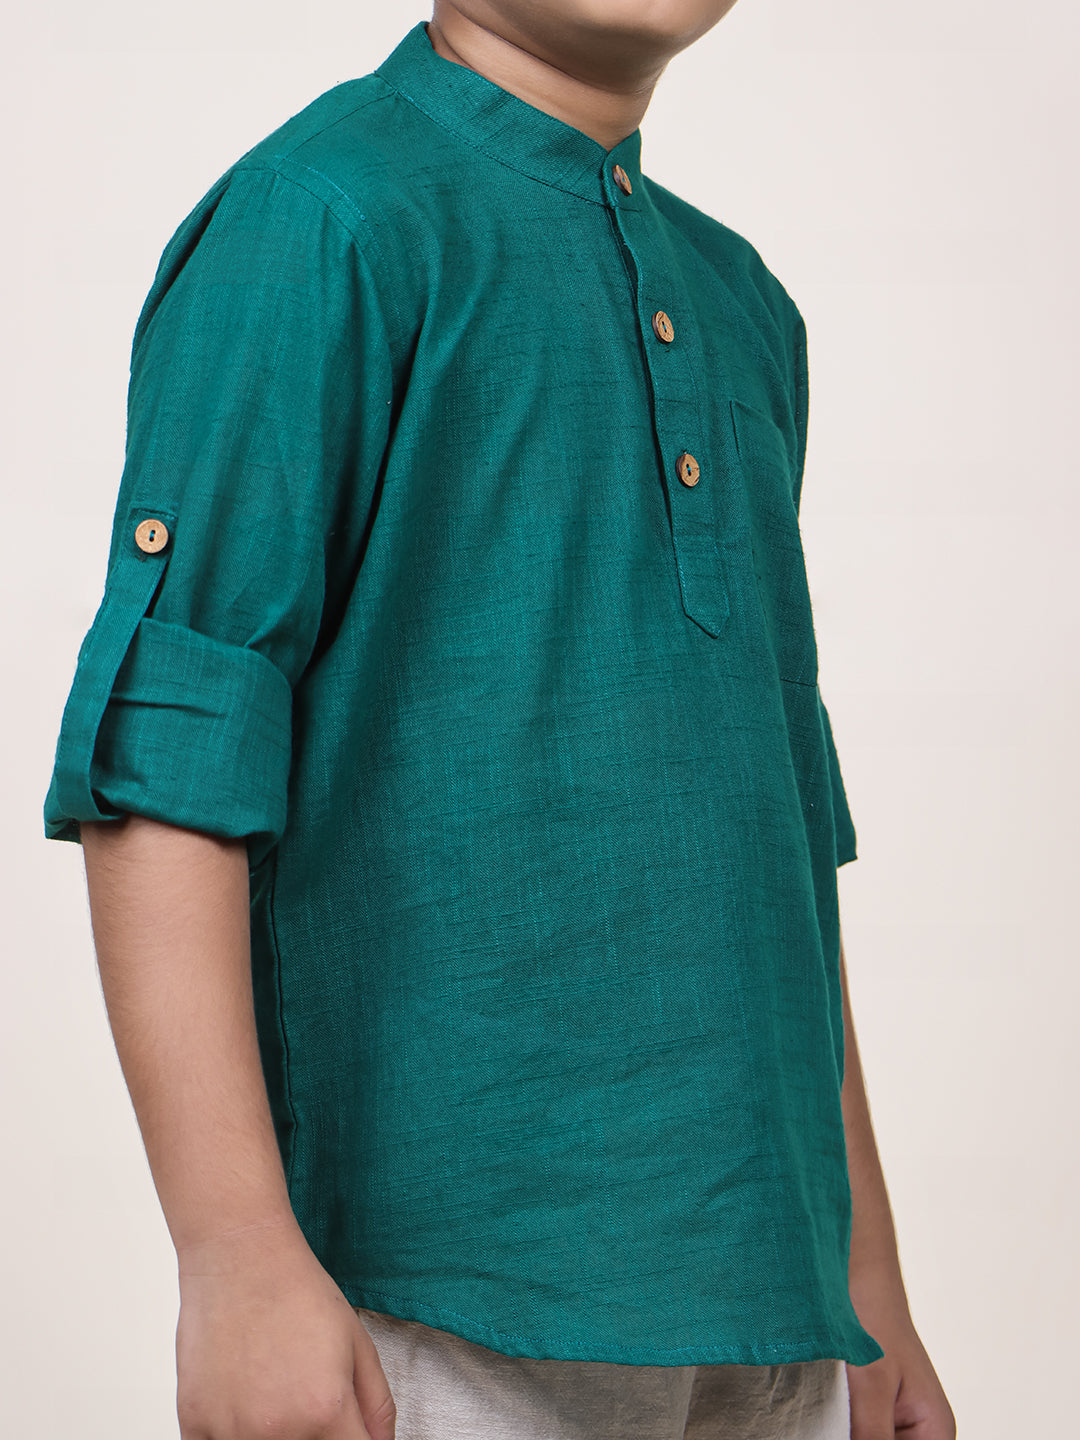 Boys Green Rolled Up Cotton Shirt